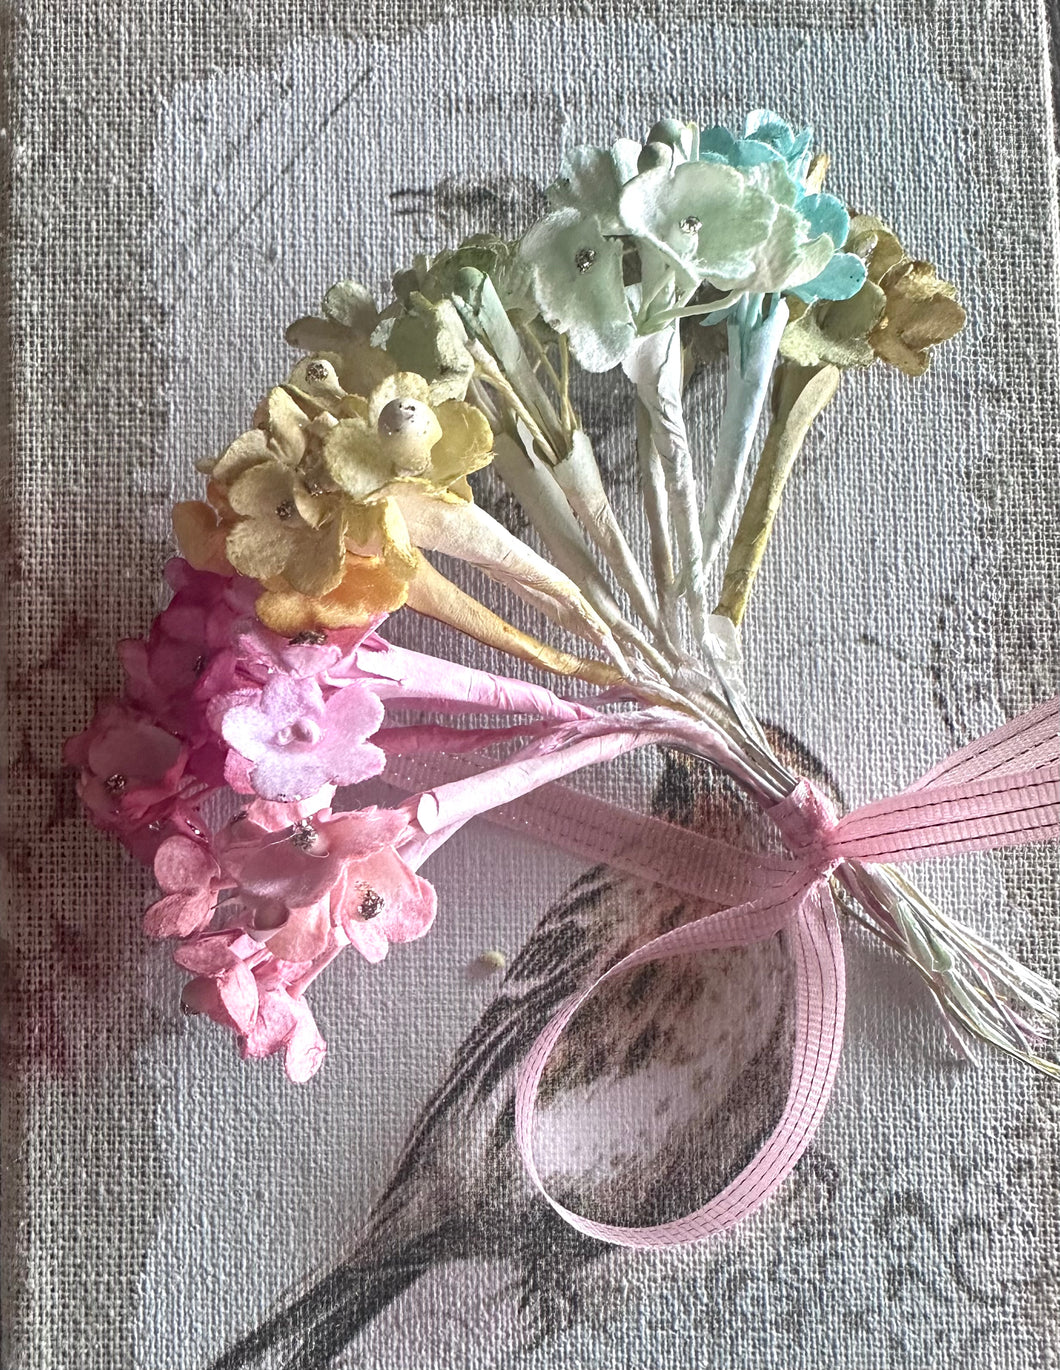 EASTER Basket Mini Collection Hand Dyed Tiny Flower Posy - Vintage Style Forget Me Not Flowers for Display and Crafting